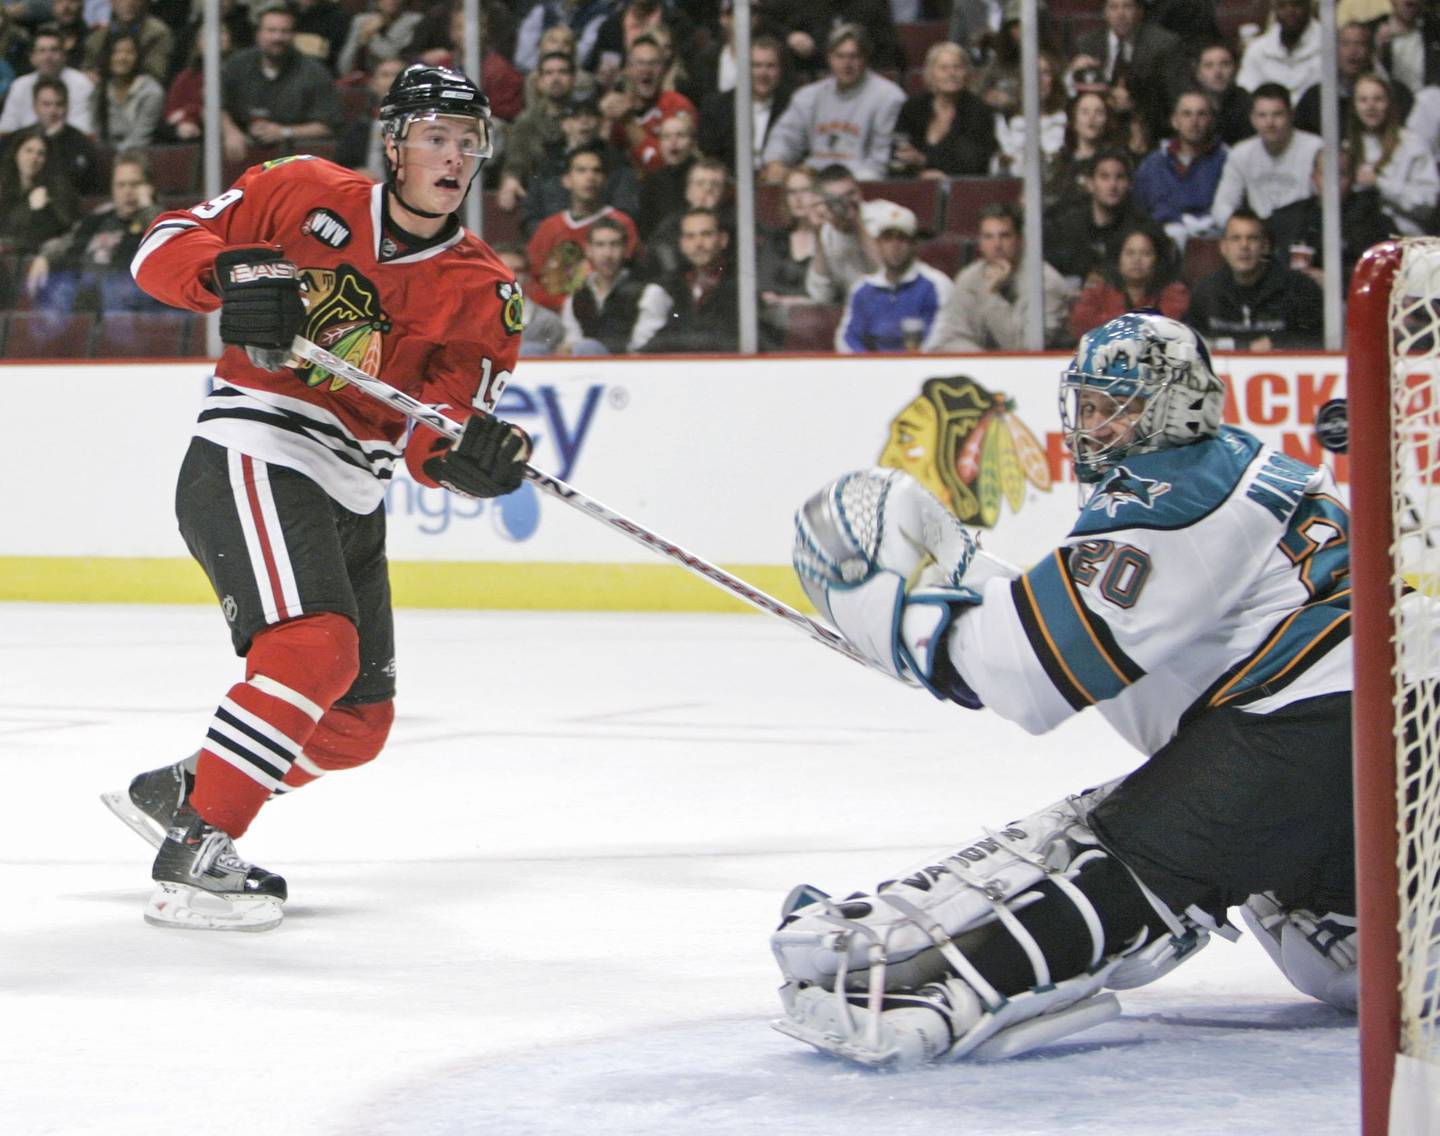 Jonathan Toews, in his first game with the Blackhawks, scores past Sharks goaltender Evgeni Nabokov in the first period on Oct. 10, 2007, at the United Center.